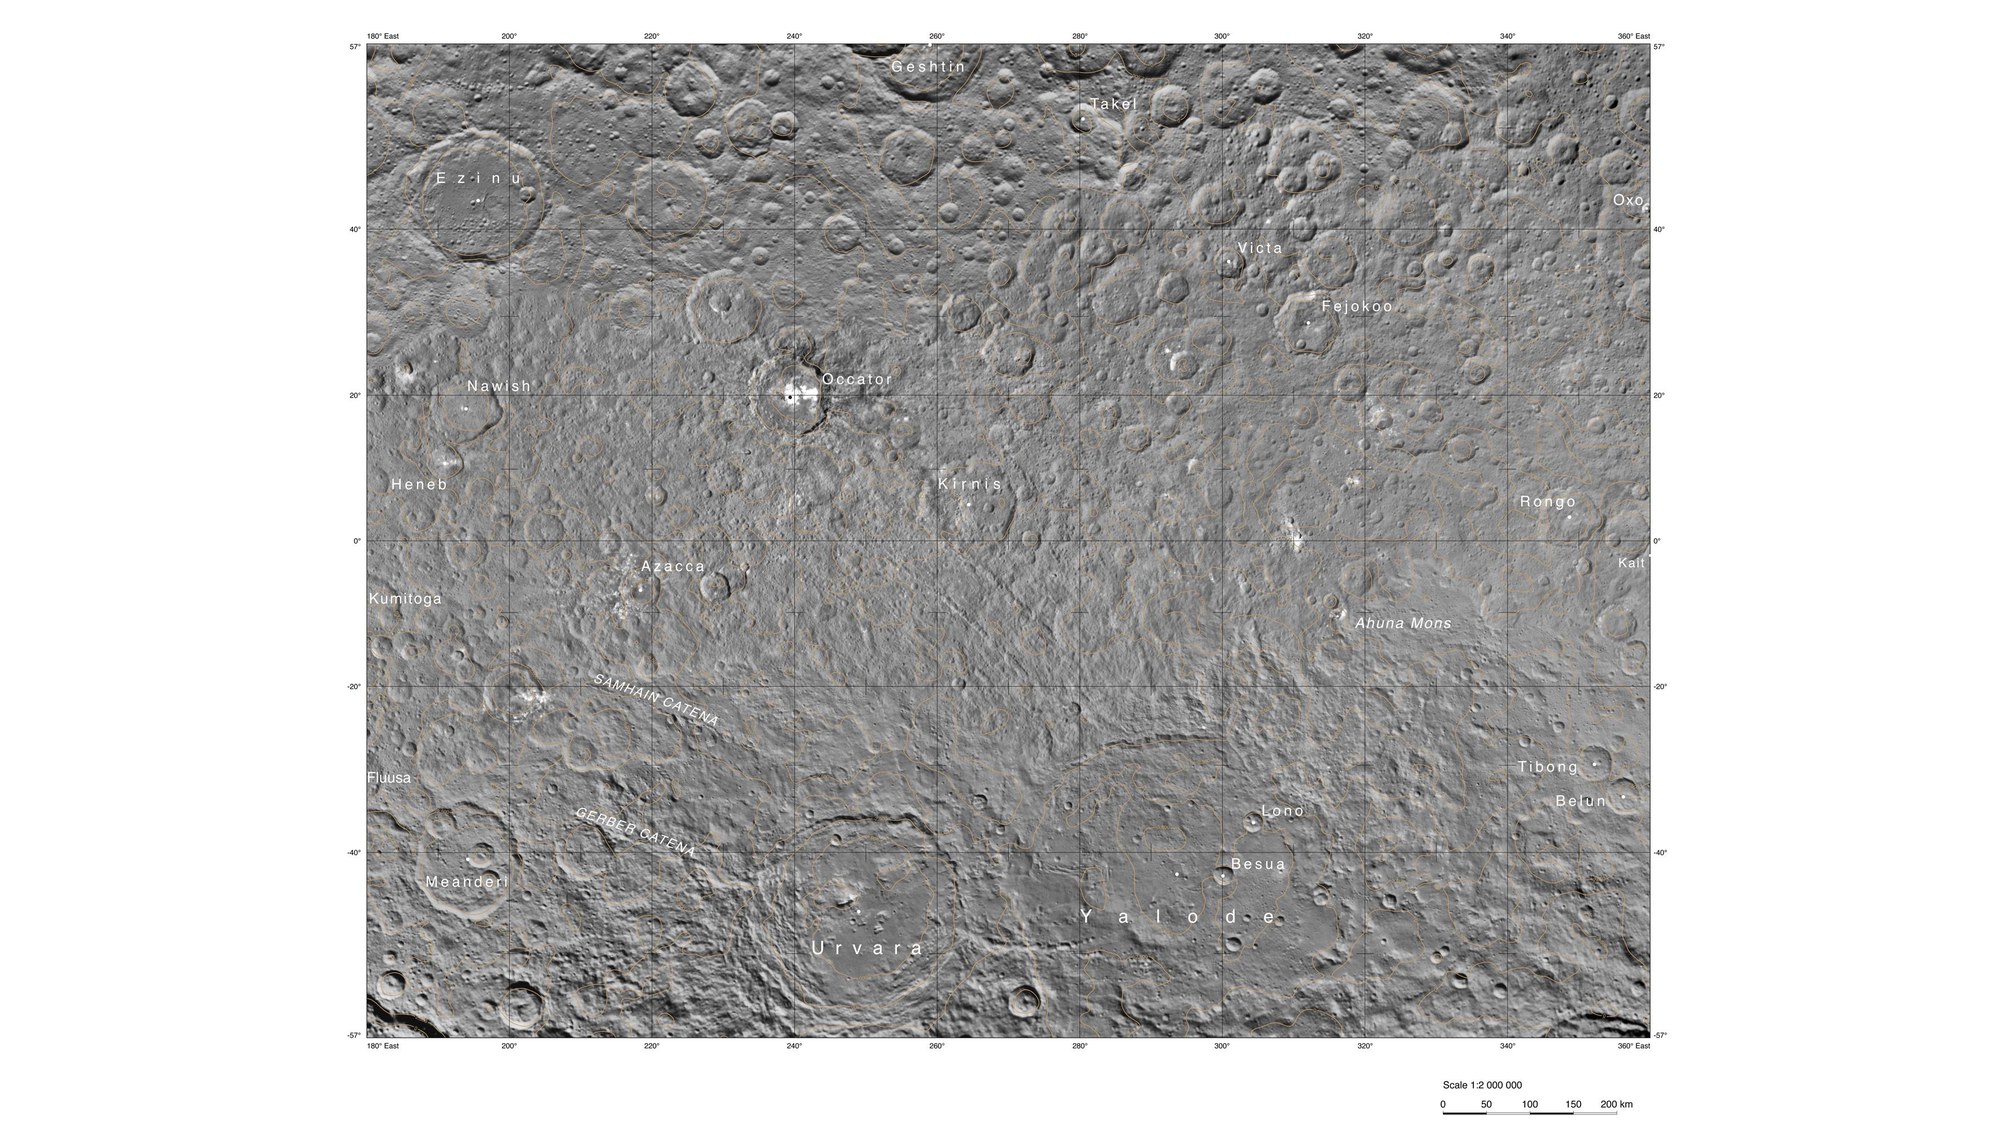 Occator region on the dwarf planet Ceres